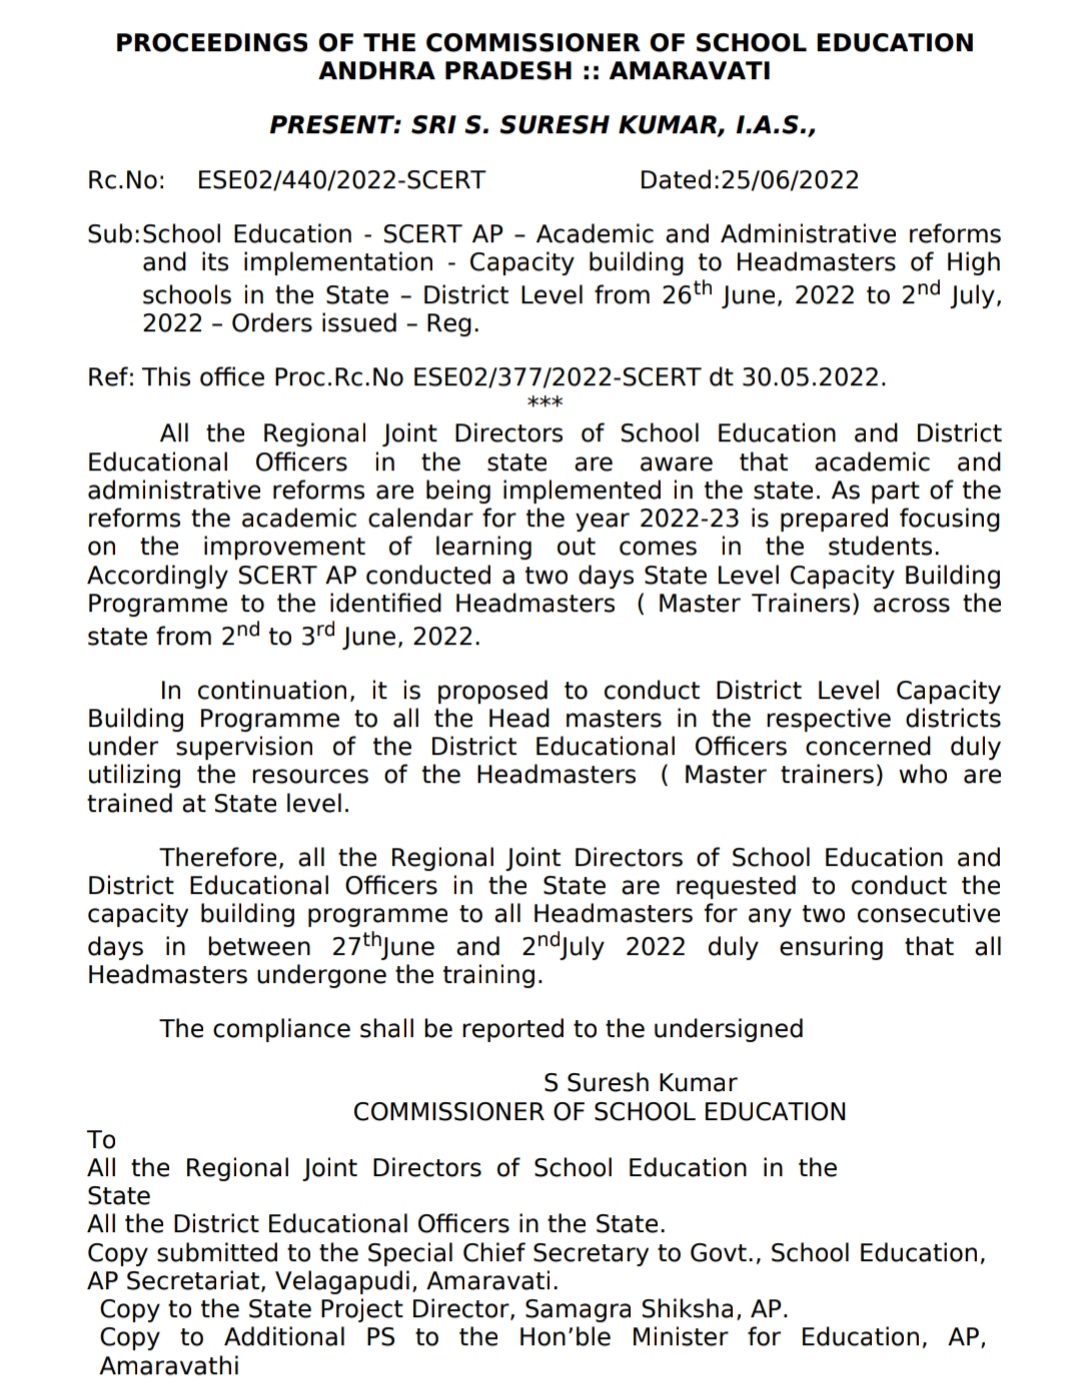 Capacity building to Headmasters of High schools in the State – District Level from 26th June, 2022 to 2nd July, 2022 – Orders